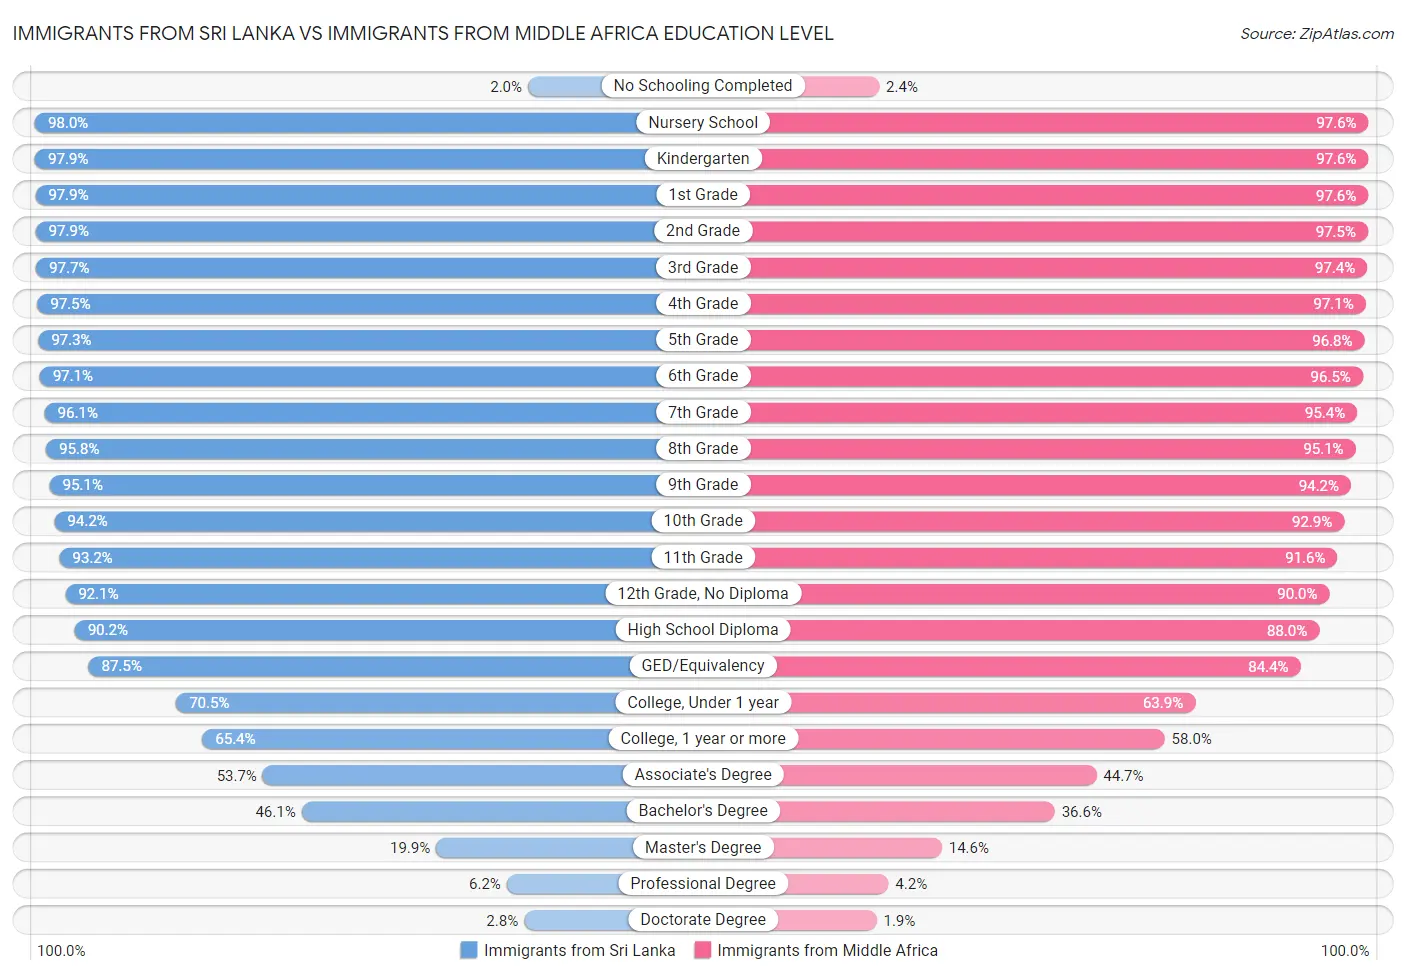 Immigrants from Sri Lanka vs Immigrants from Middle Africa Education Level